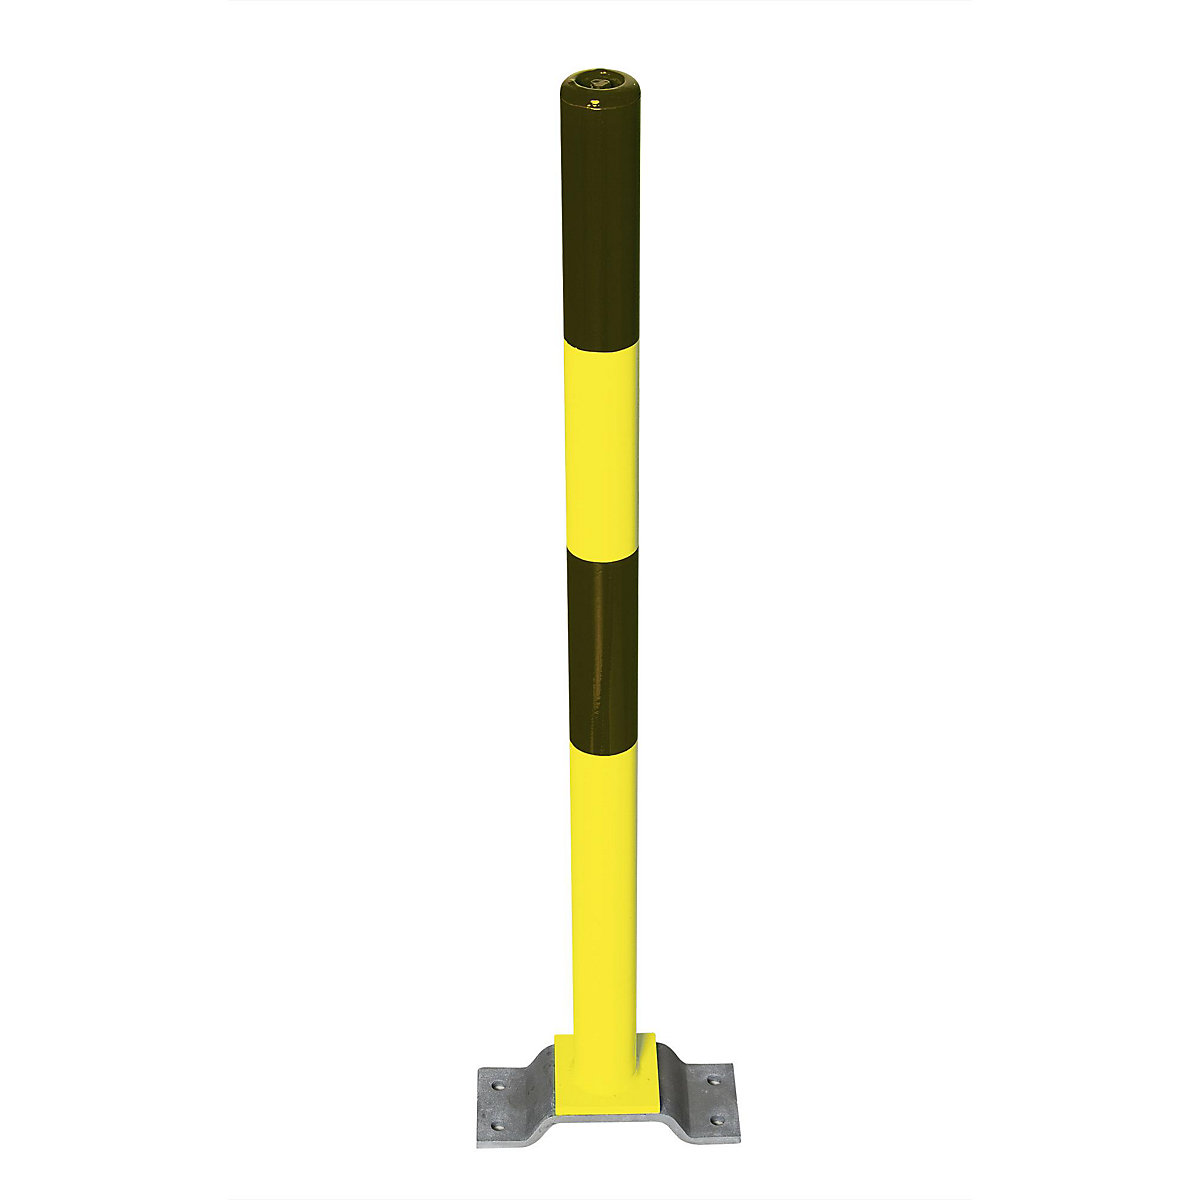 Barrier post made of steel, for bolting in place, Ø 60 mm, black/yellow-6